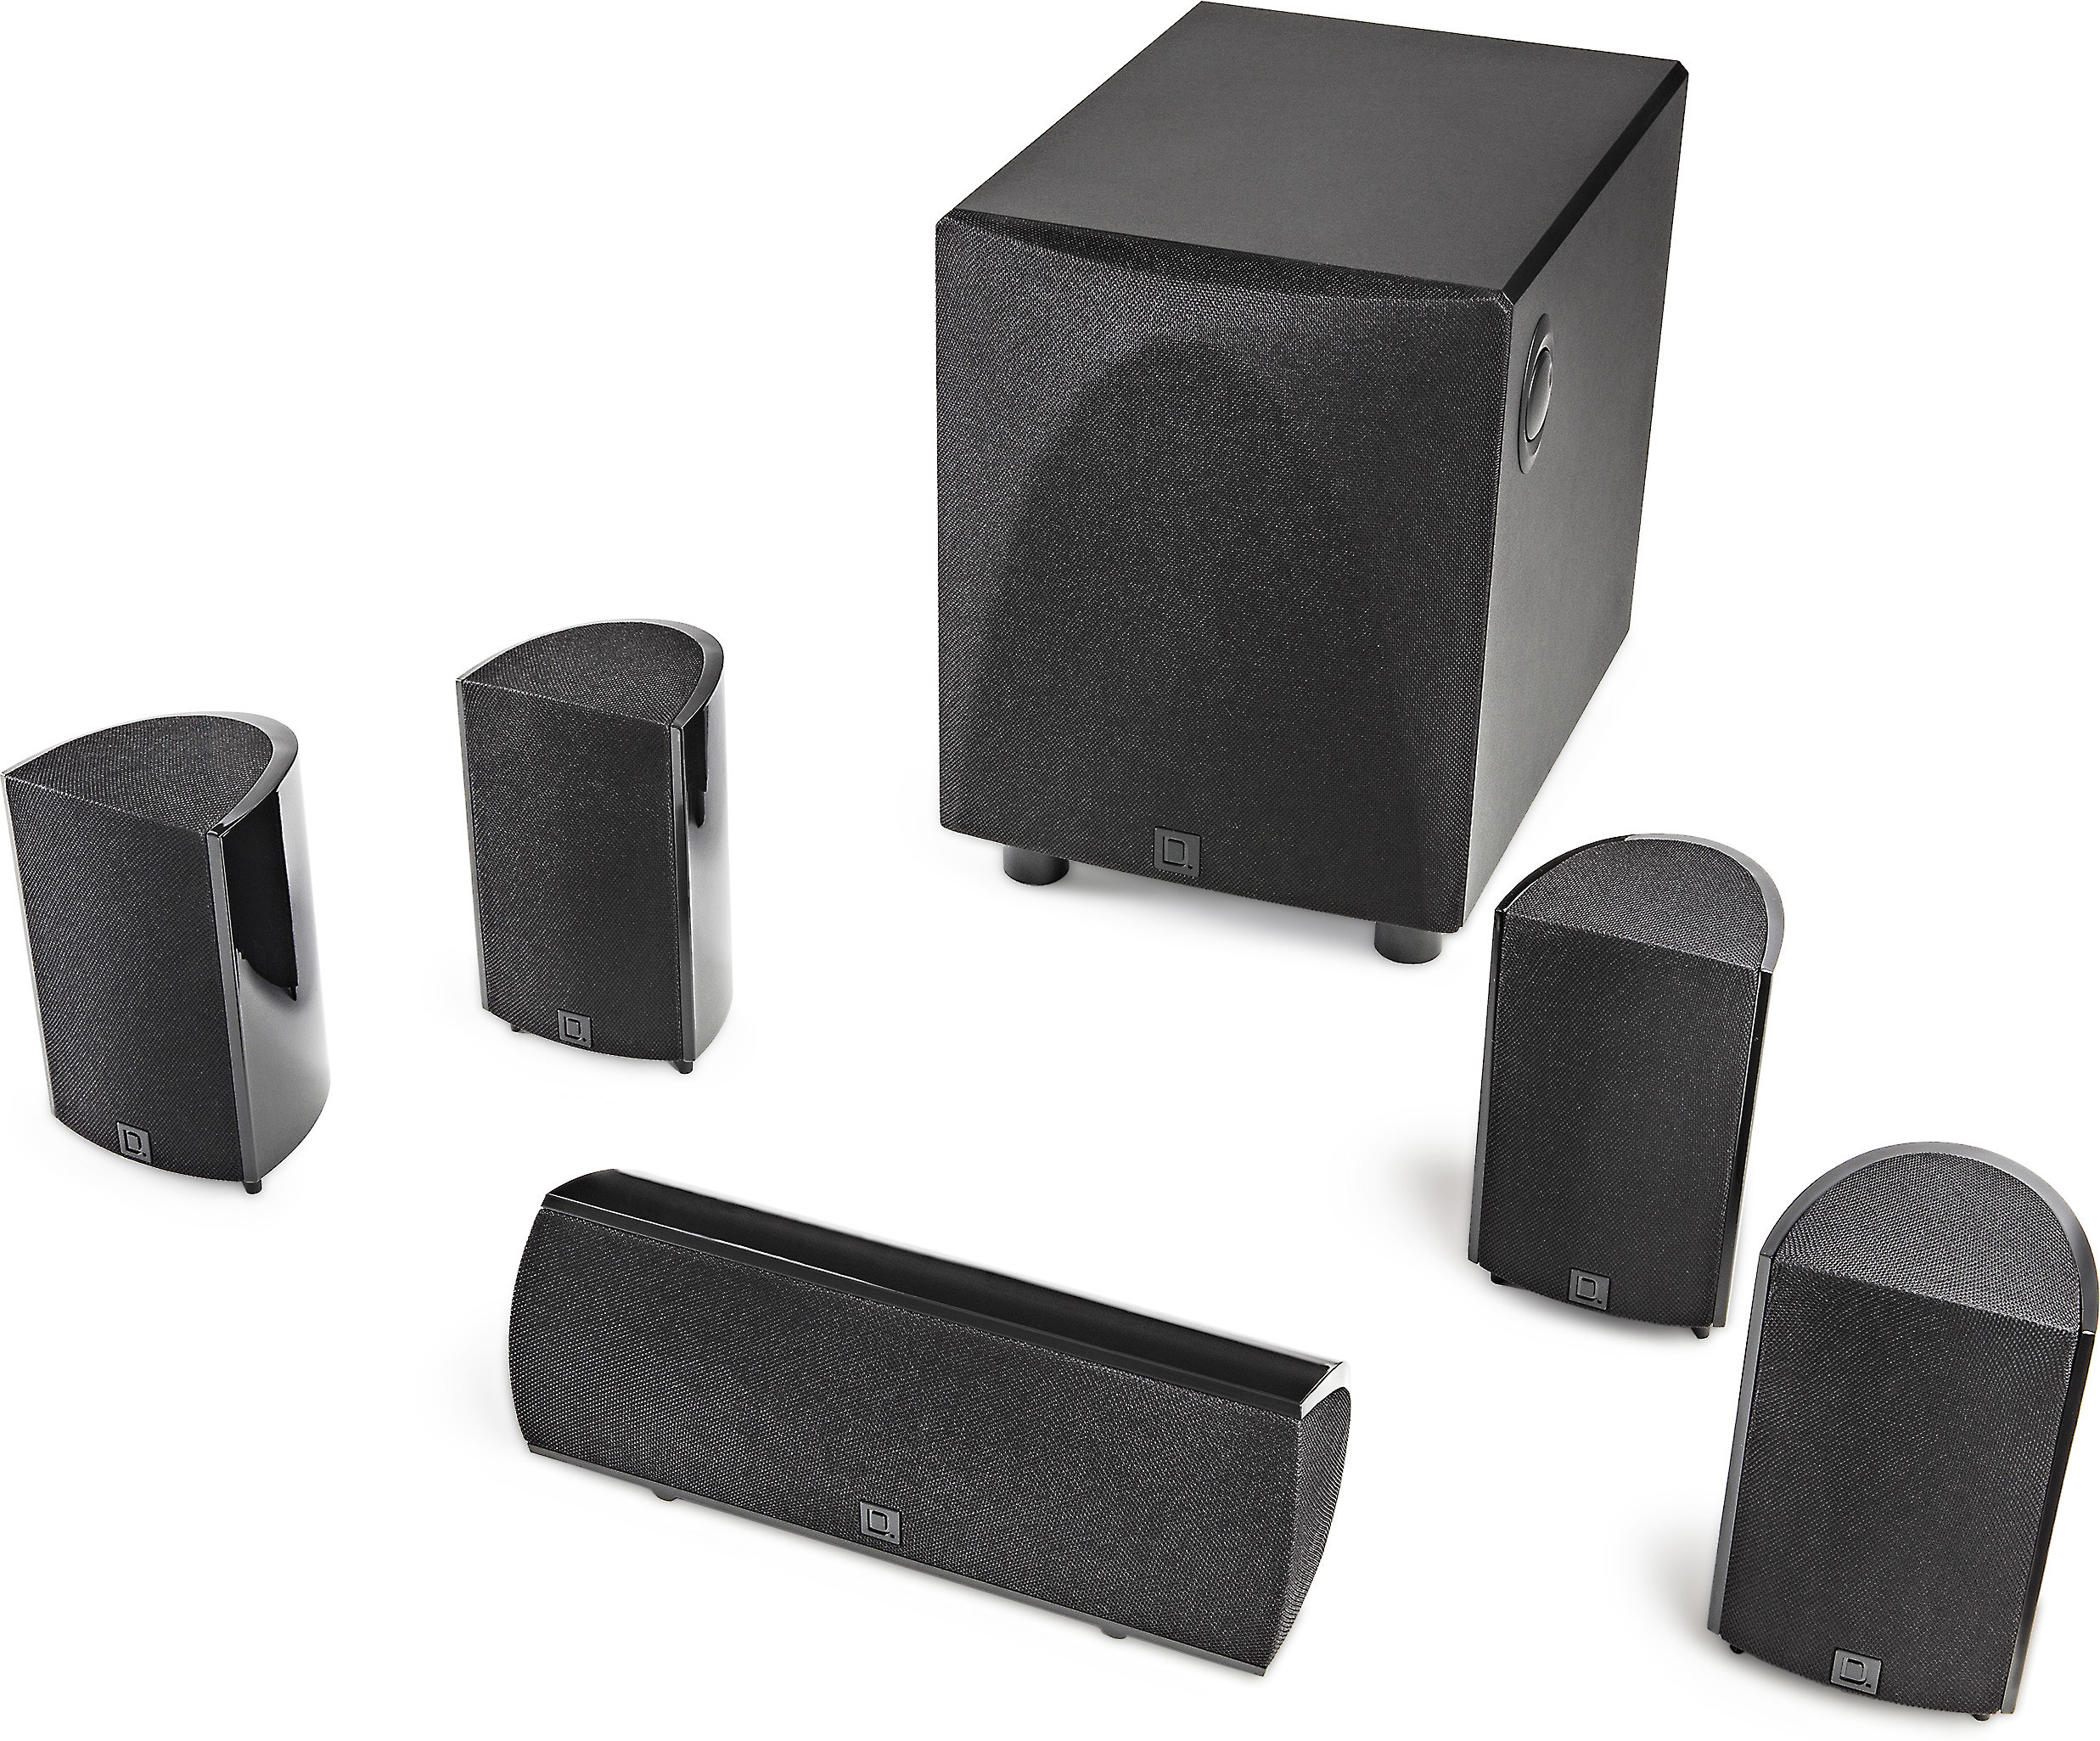 Audio Speaker System Cheap Sale, 52% OFF | empow-her.com